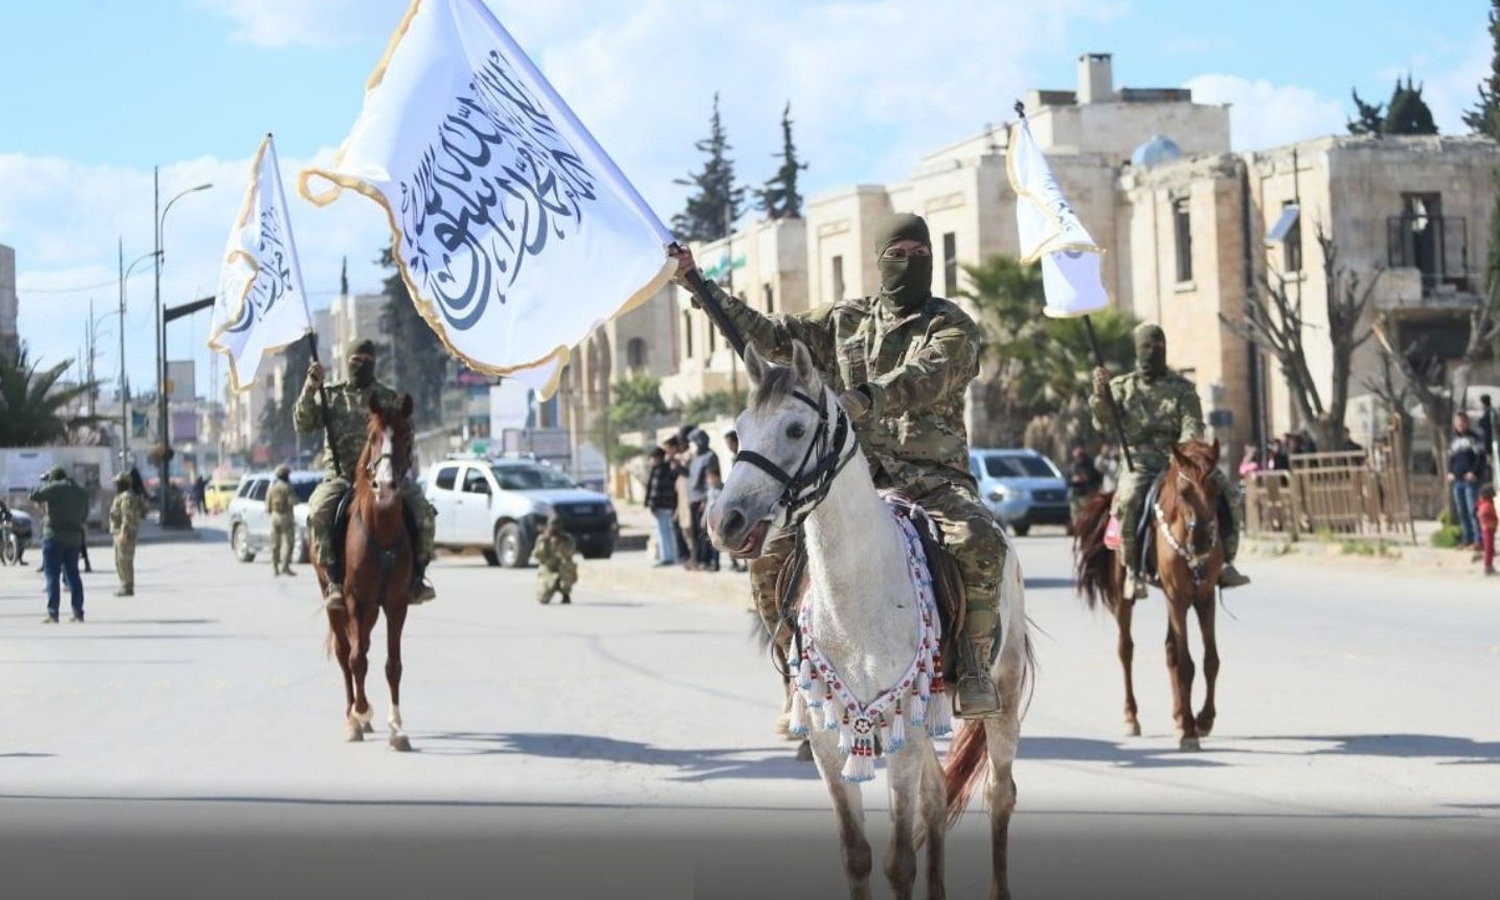 A military parade by Hayat Tahrir al-Sham (HTS) fighters in al-Bab city, commemorating the Syrian revolution’s tenth anniversary - 18 March 2021 (Amjad Media)